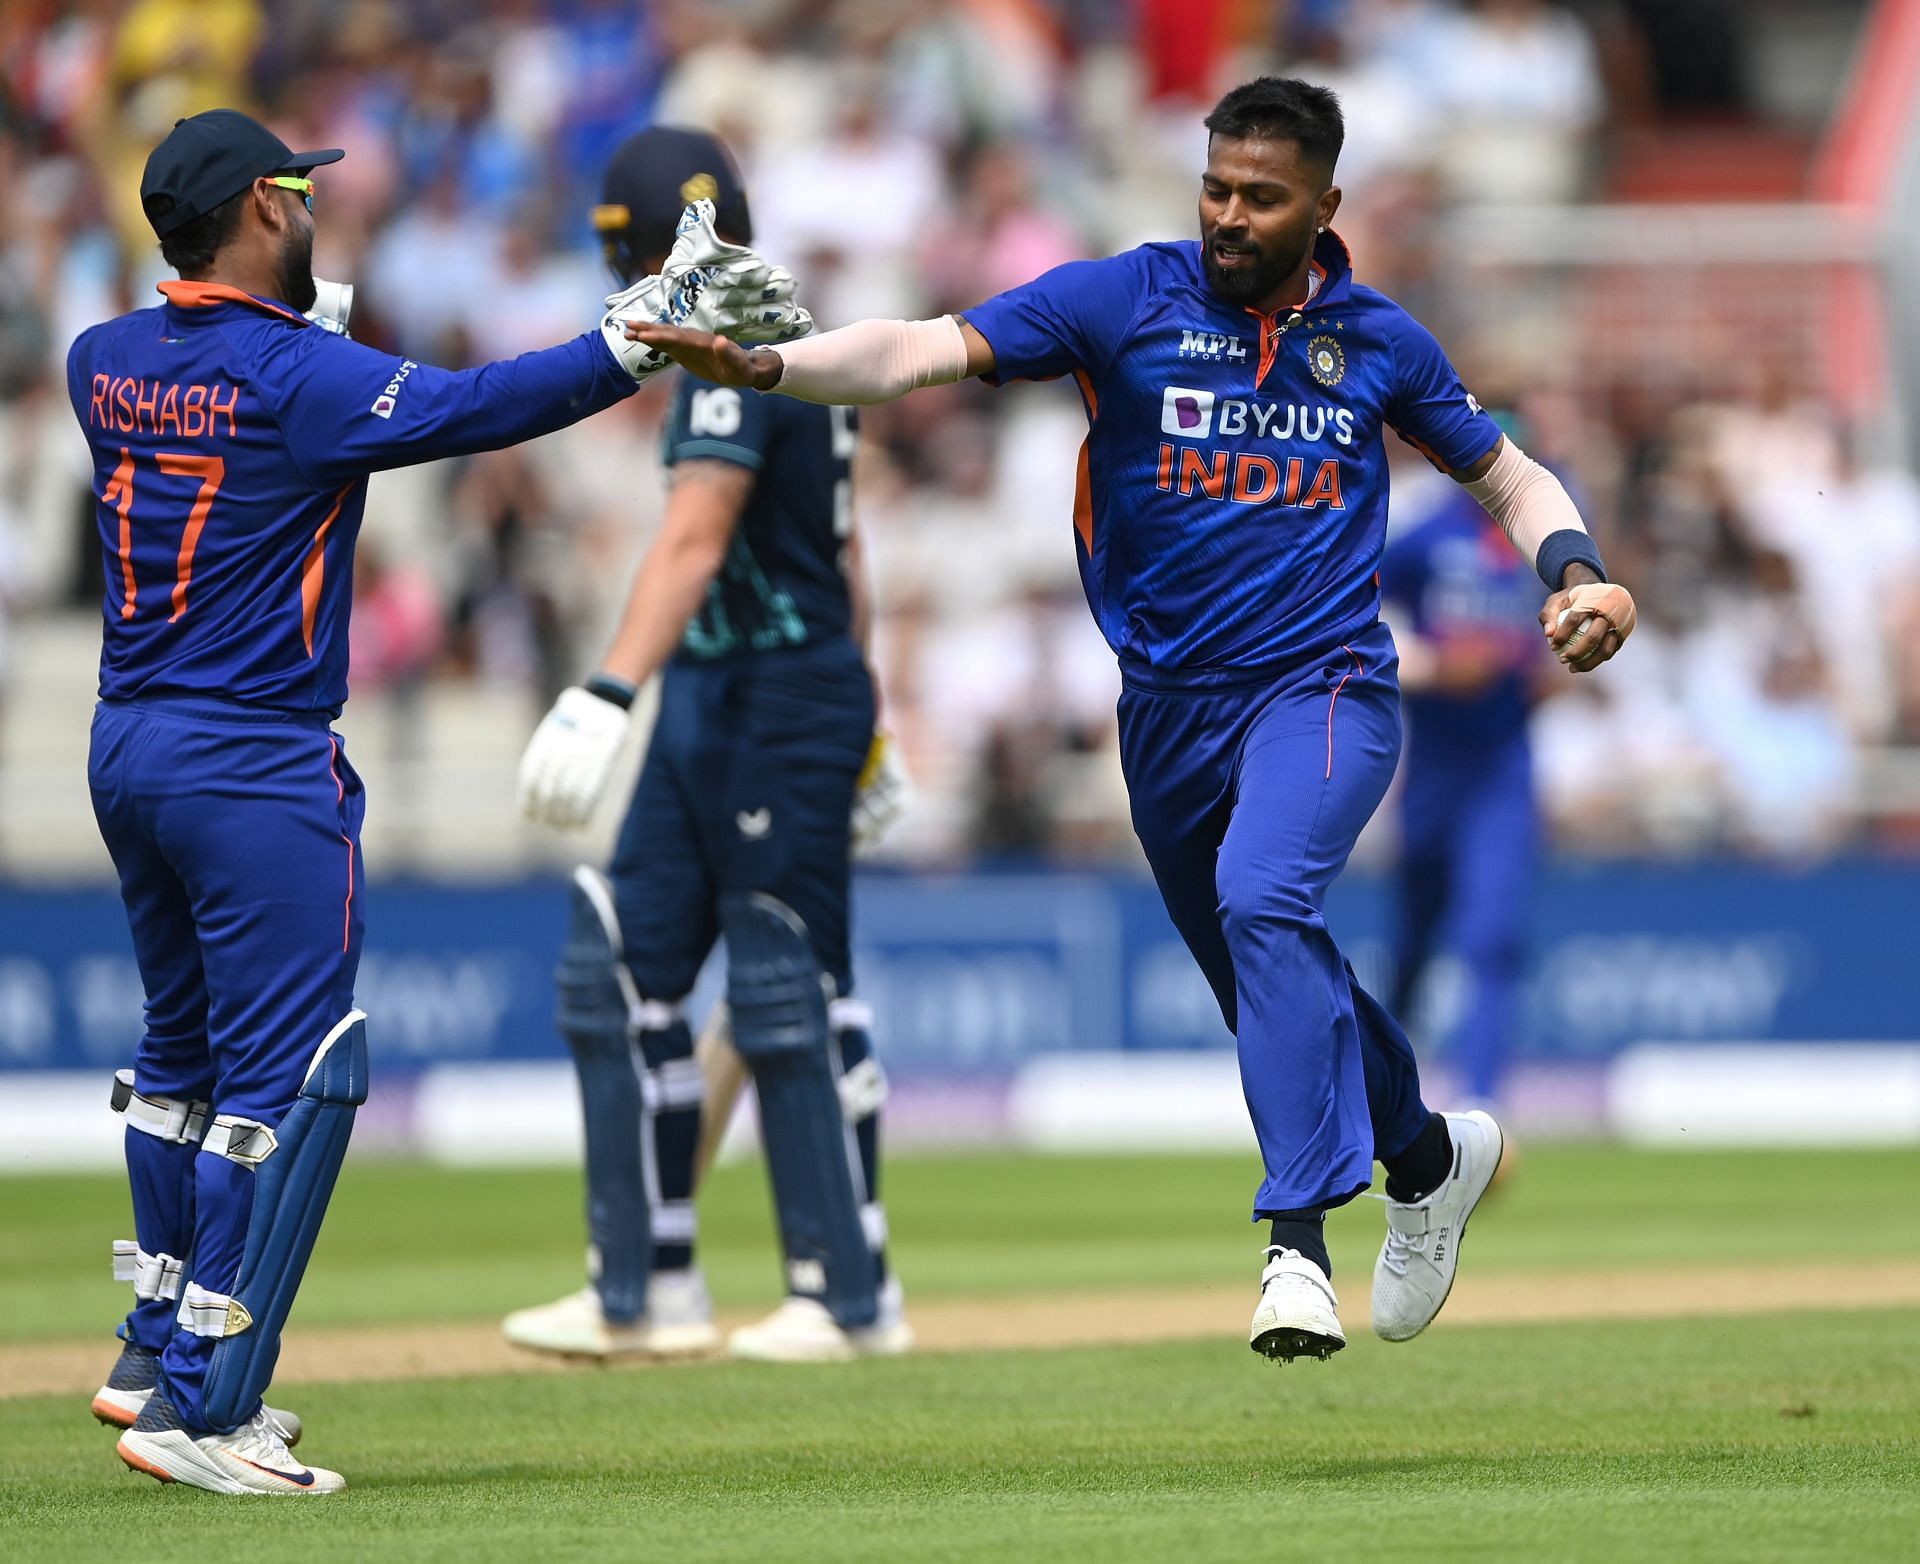 Hardik Pandya celebrates after taking the catch off his own bowling to dismiss Ben Stokes. Pic: Getty Images